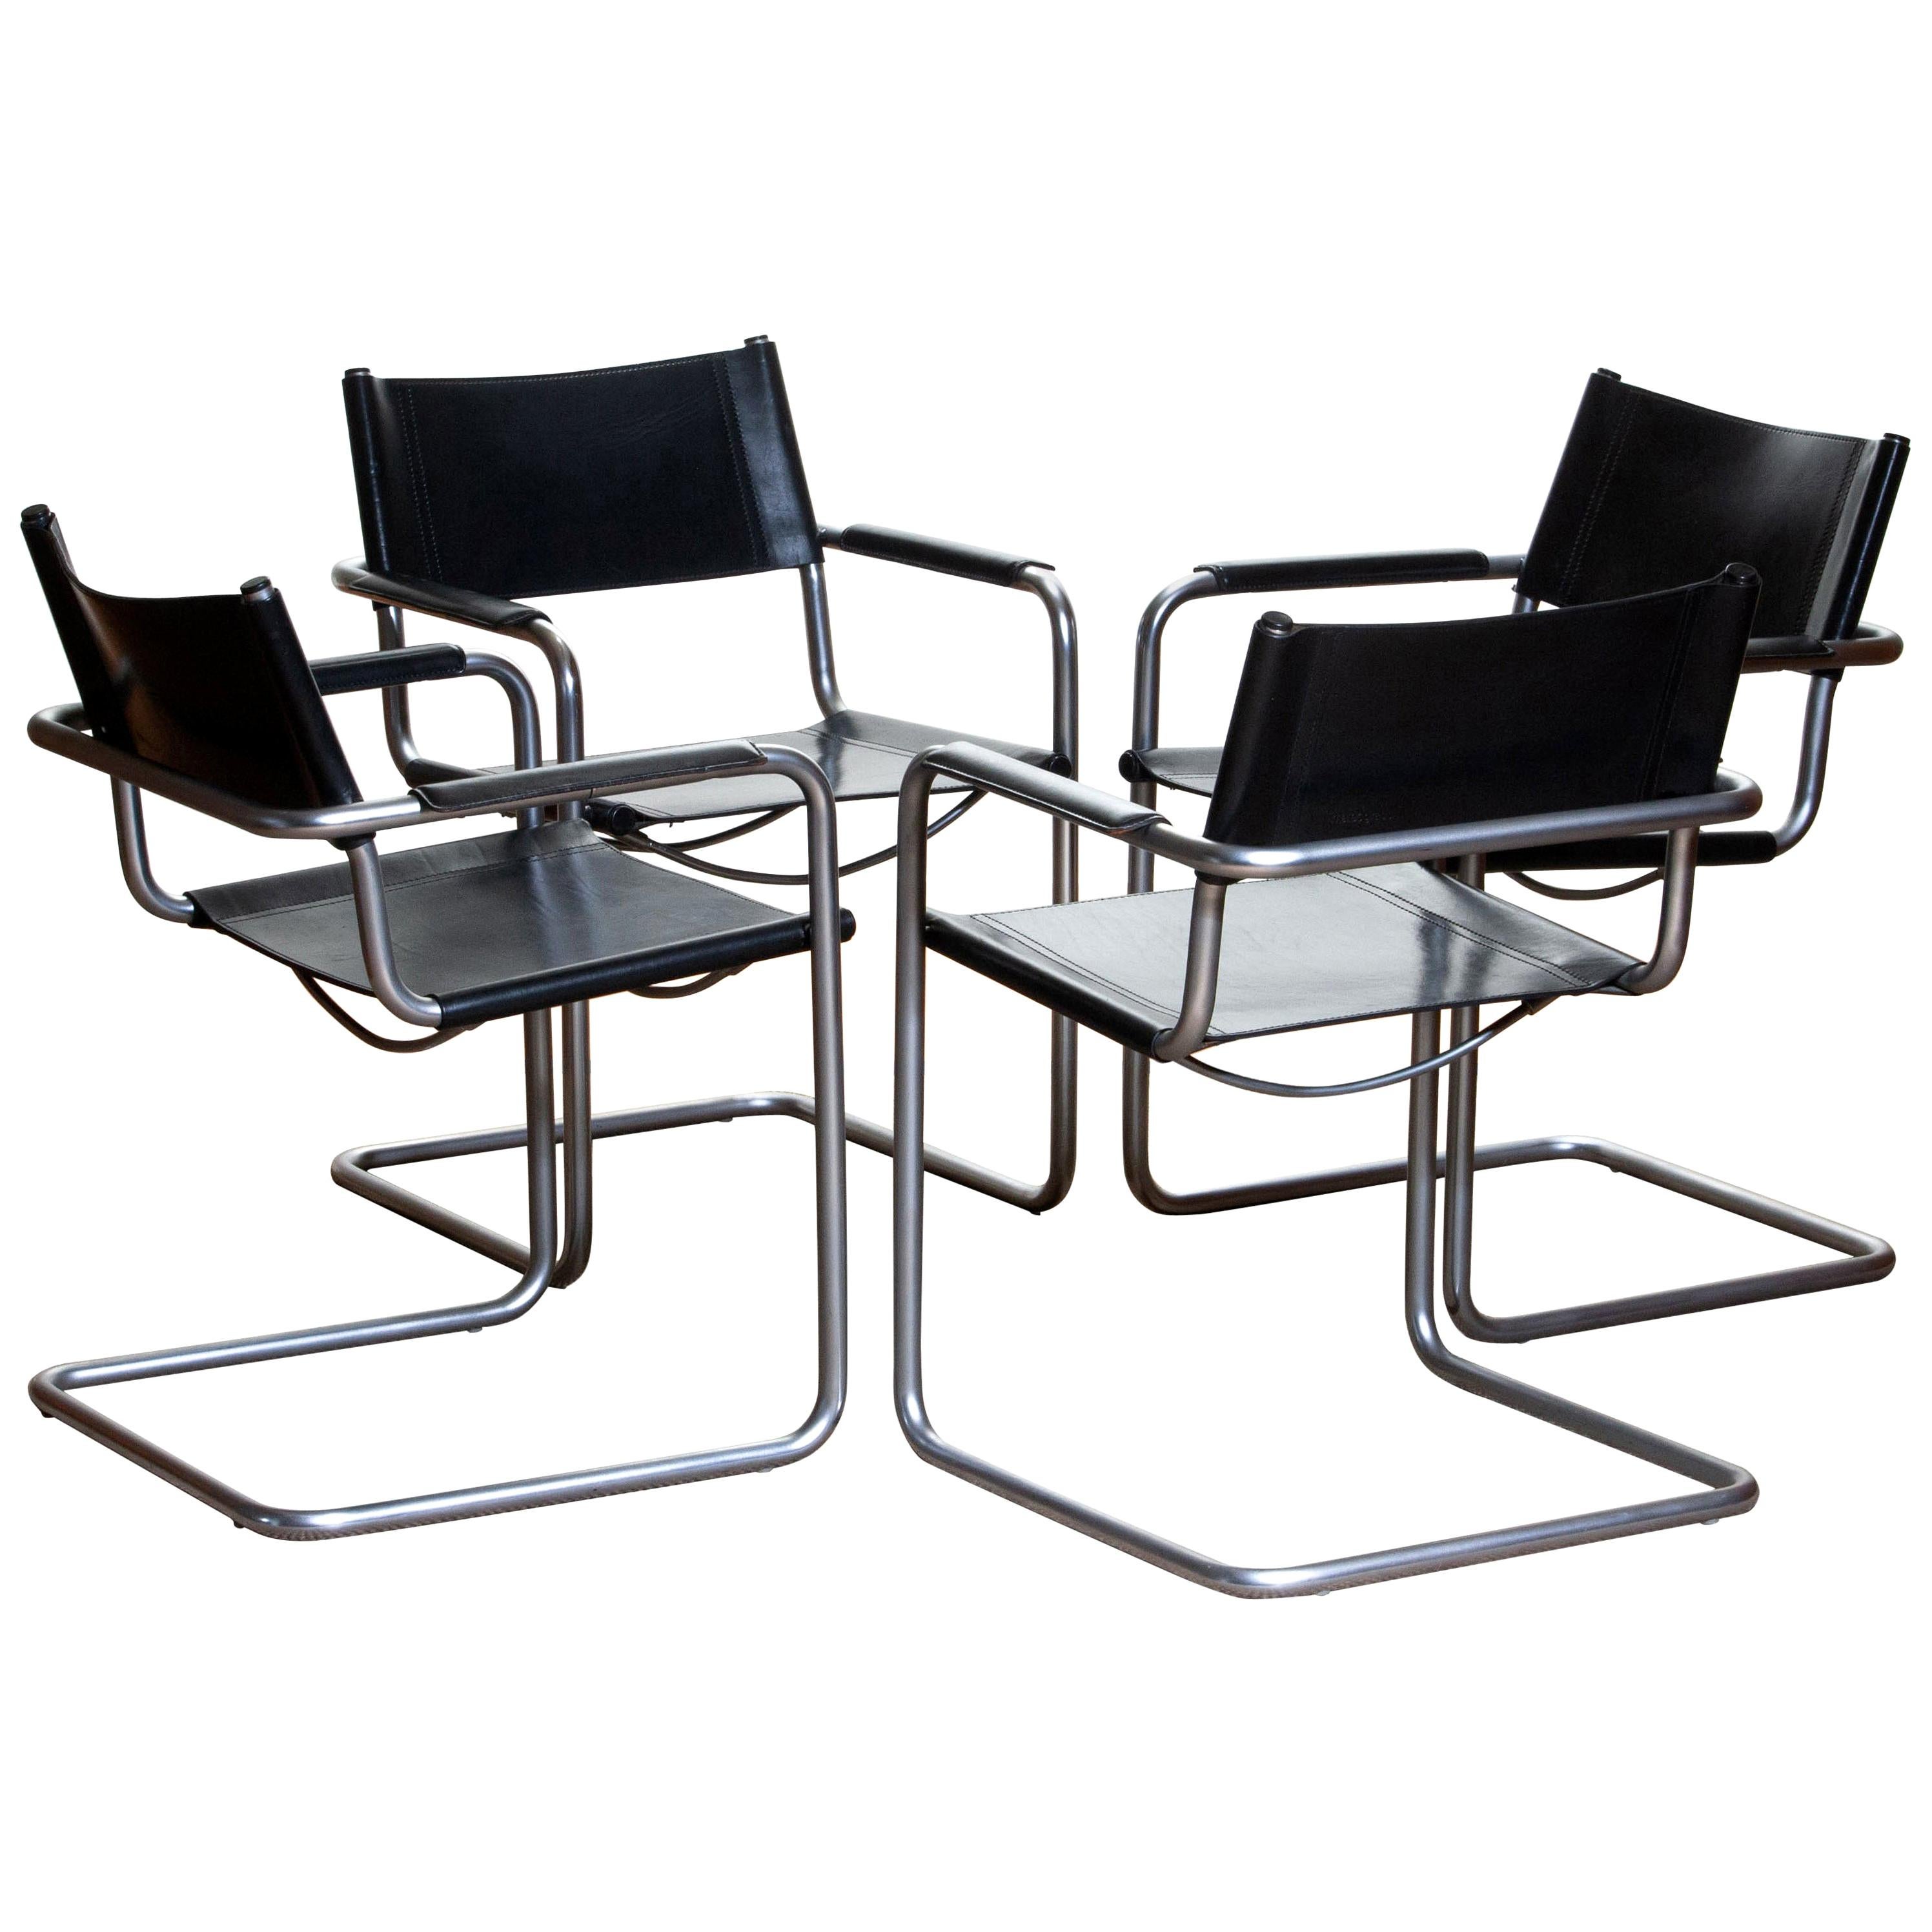 1970s, Set of Four MG5 Black Leather Dining or Office Chairs by Matteo Grassi In Good Condition In Silvolde, Gelderland